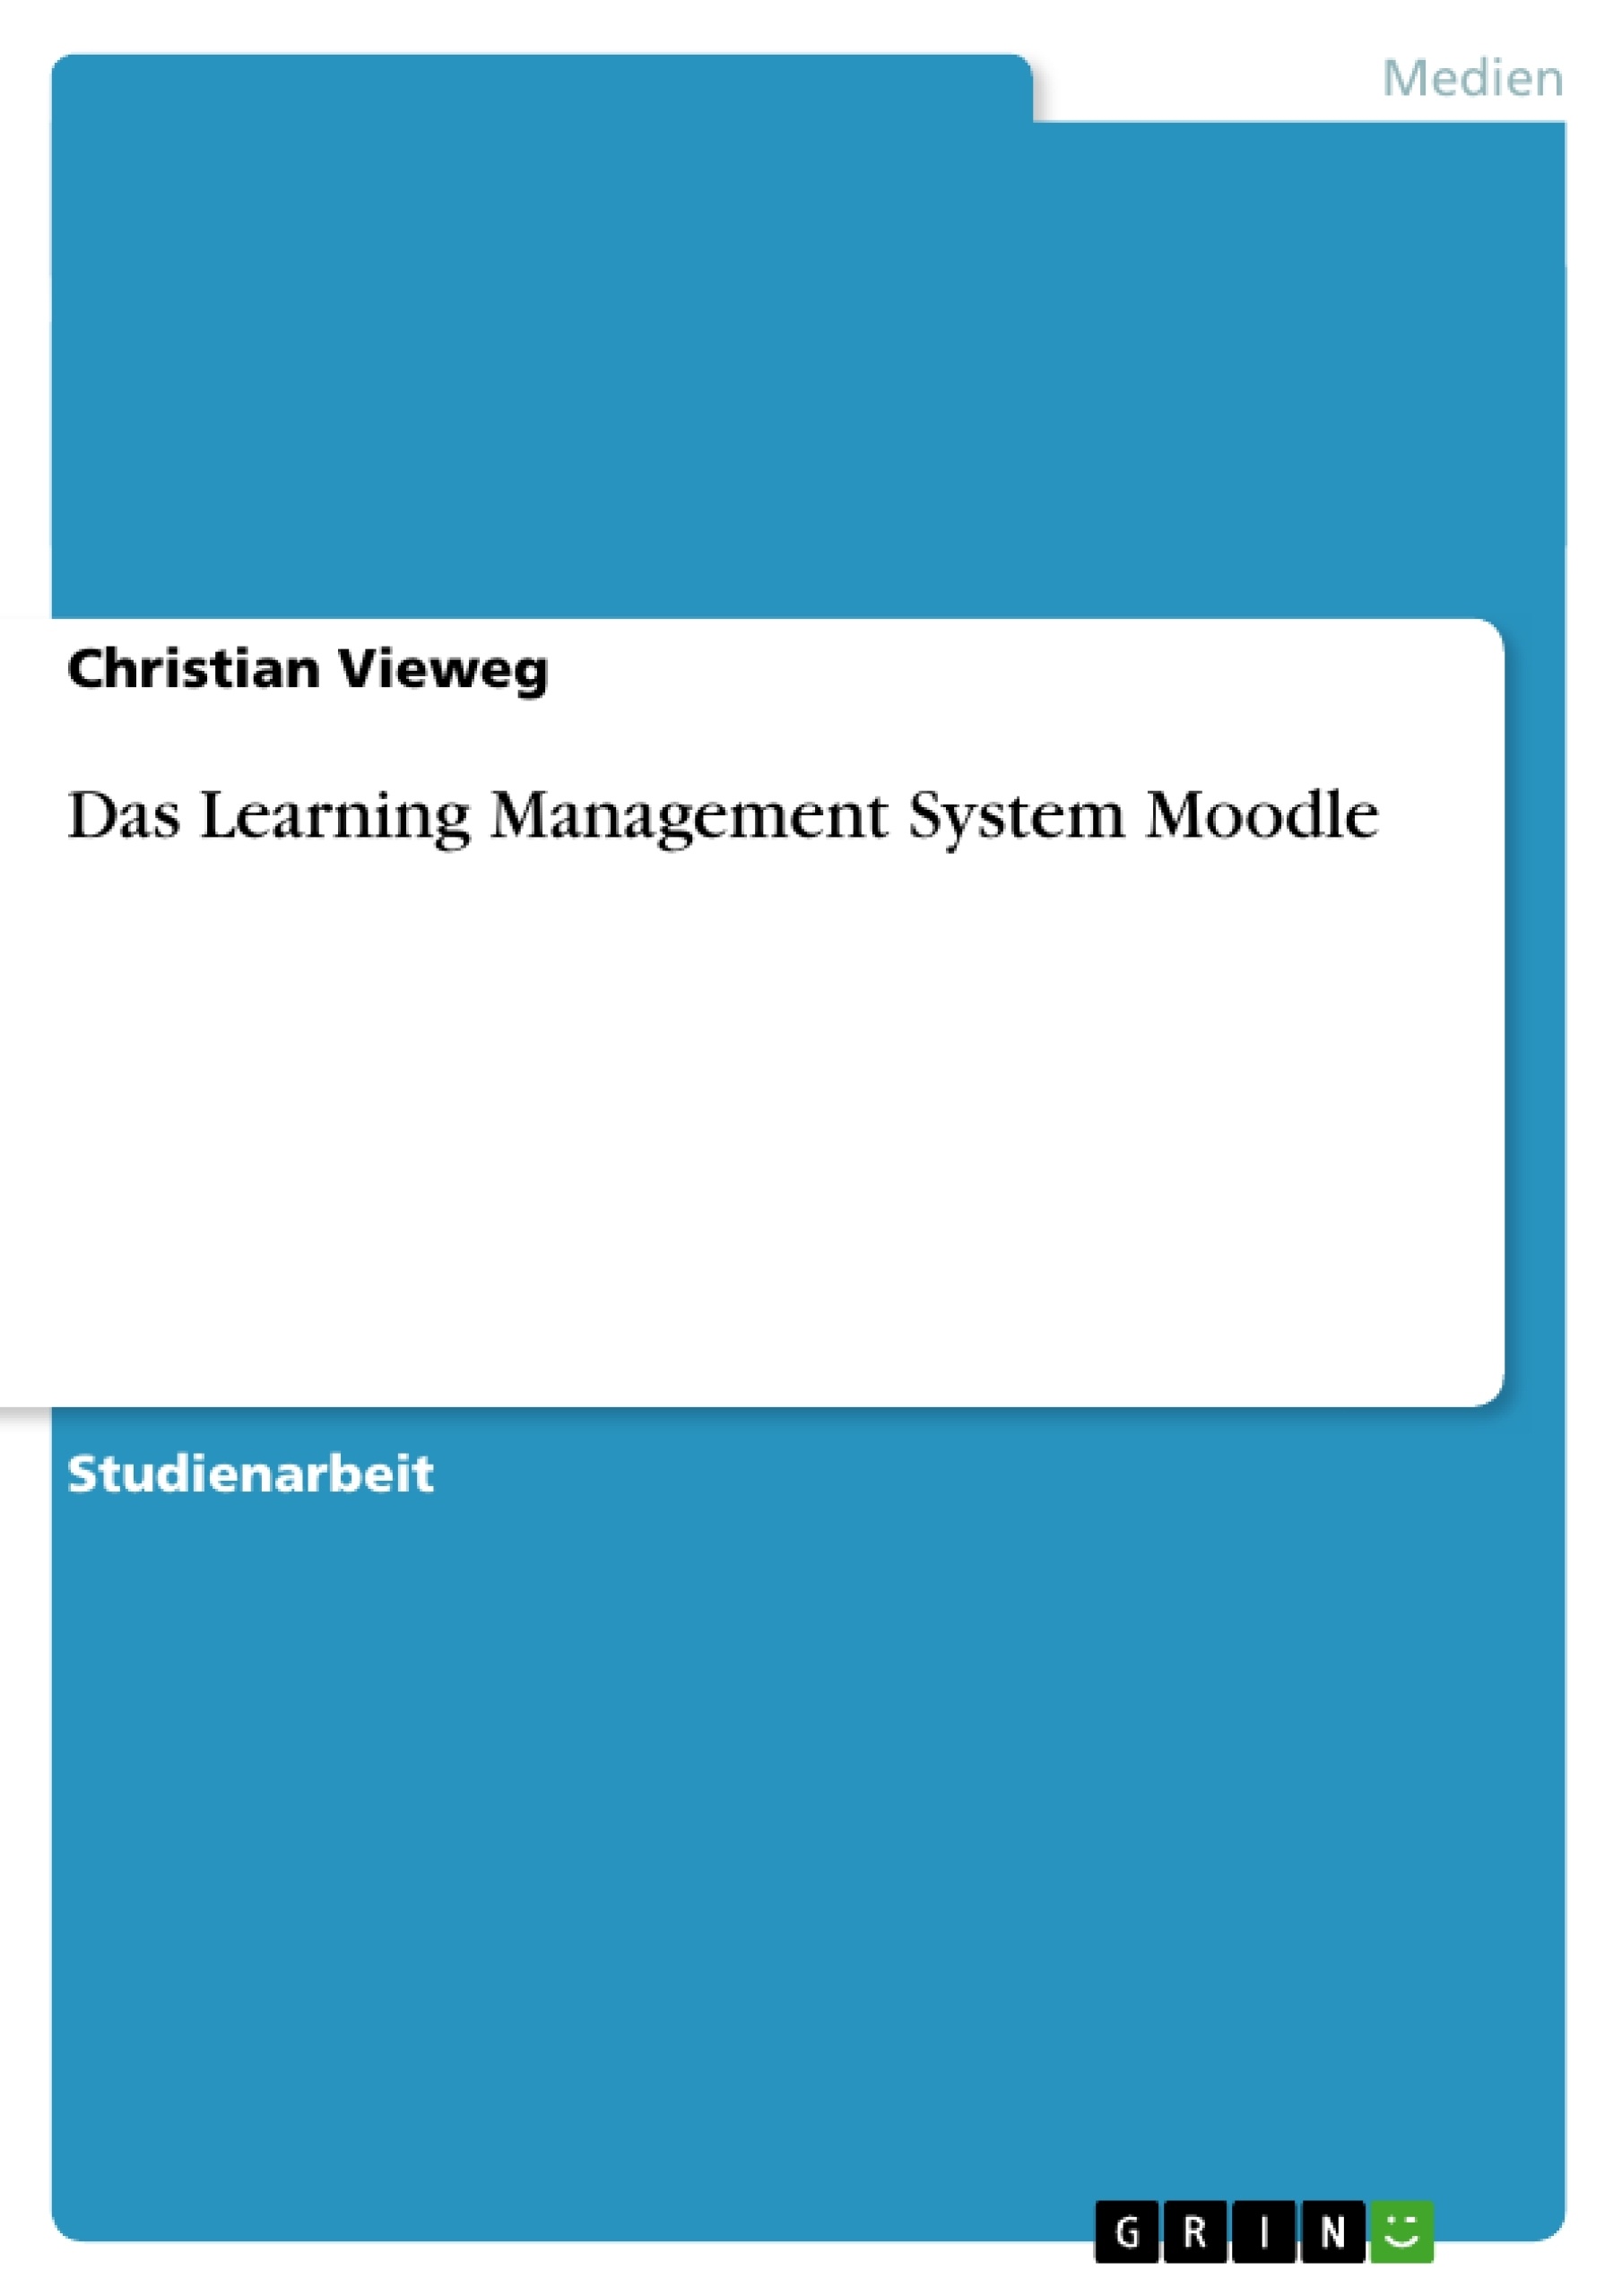 Title: Das Learning Management System Moodle